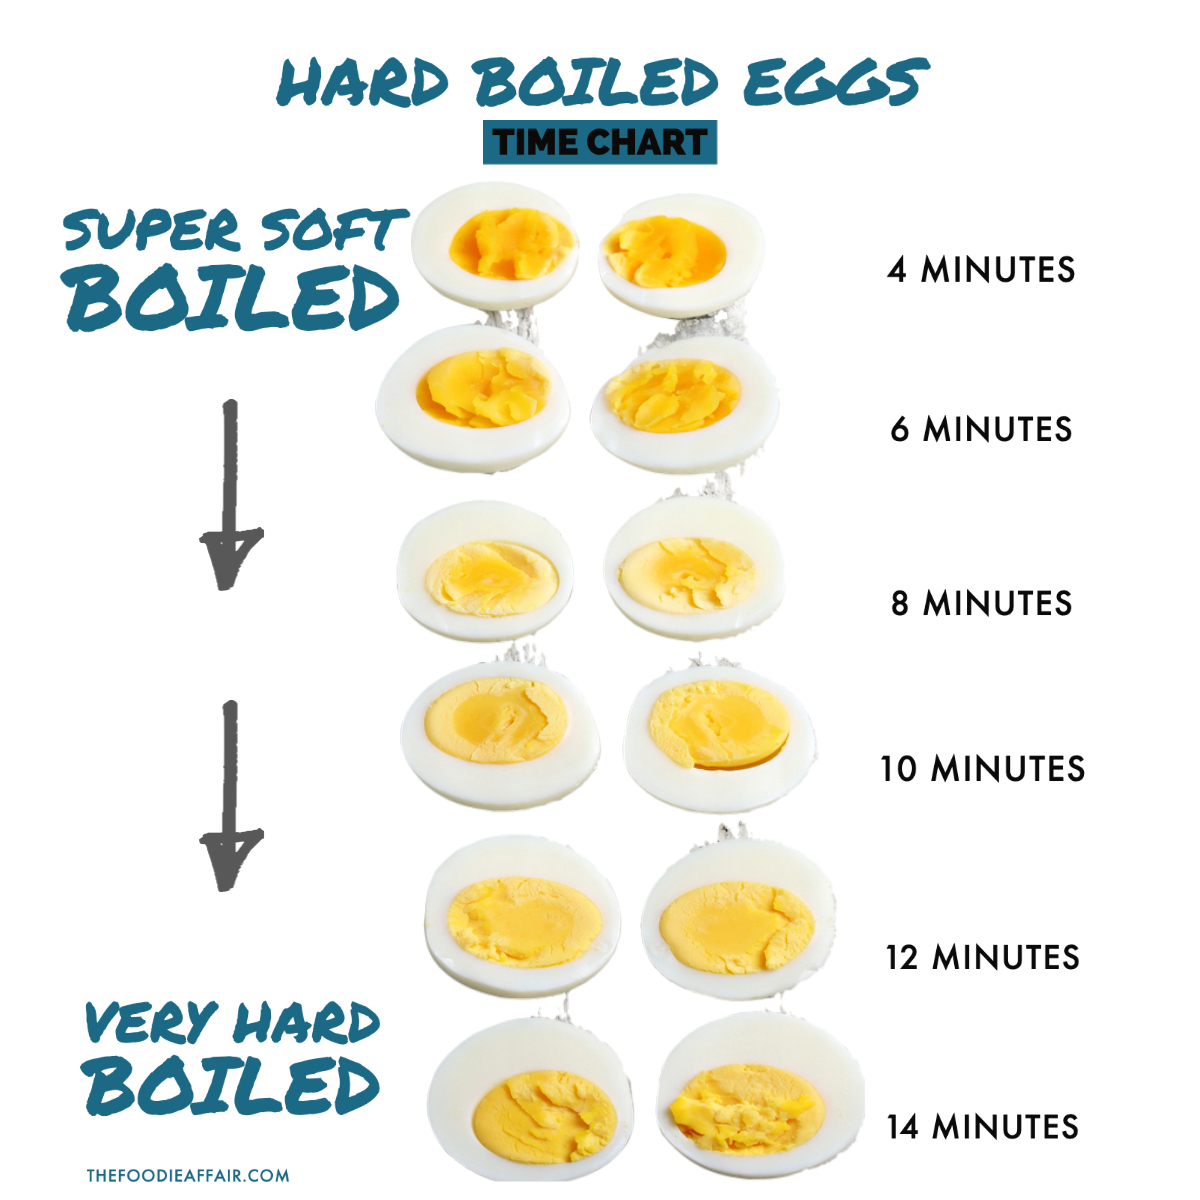 https://www.thefoodieaffair.com/wp-content/uploads/2022/03/Stovetop-Hard-Boiled-Eggs-1200.jpg